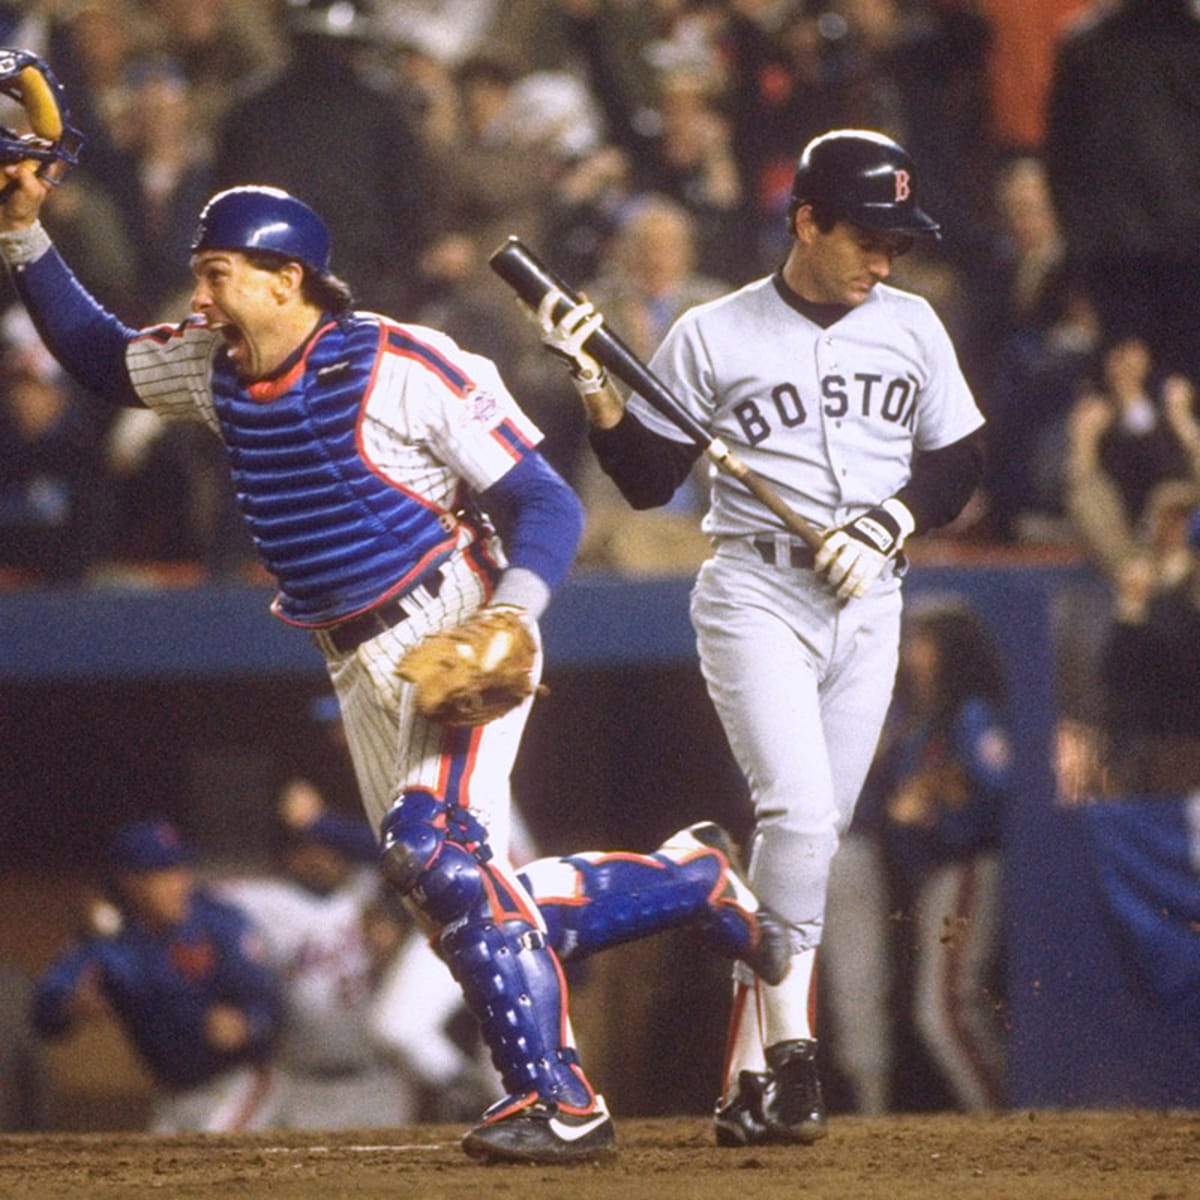 1986 World Series Game 7: Mets vs Red Sox, On this day in 1986, the Mets  beat the Red Sox in Game 7 to become World Series champions!